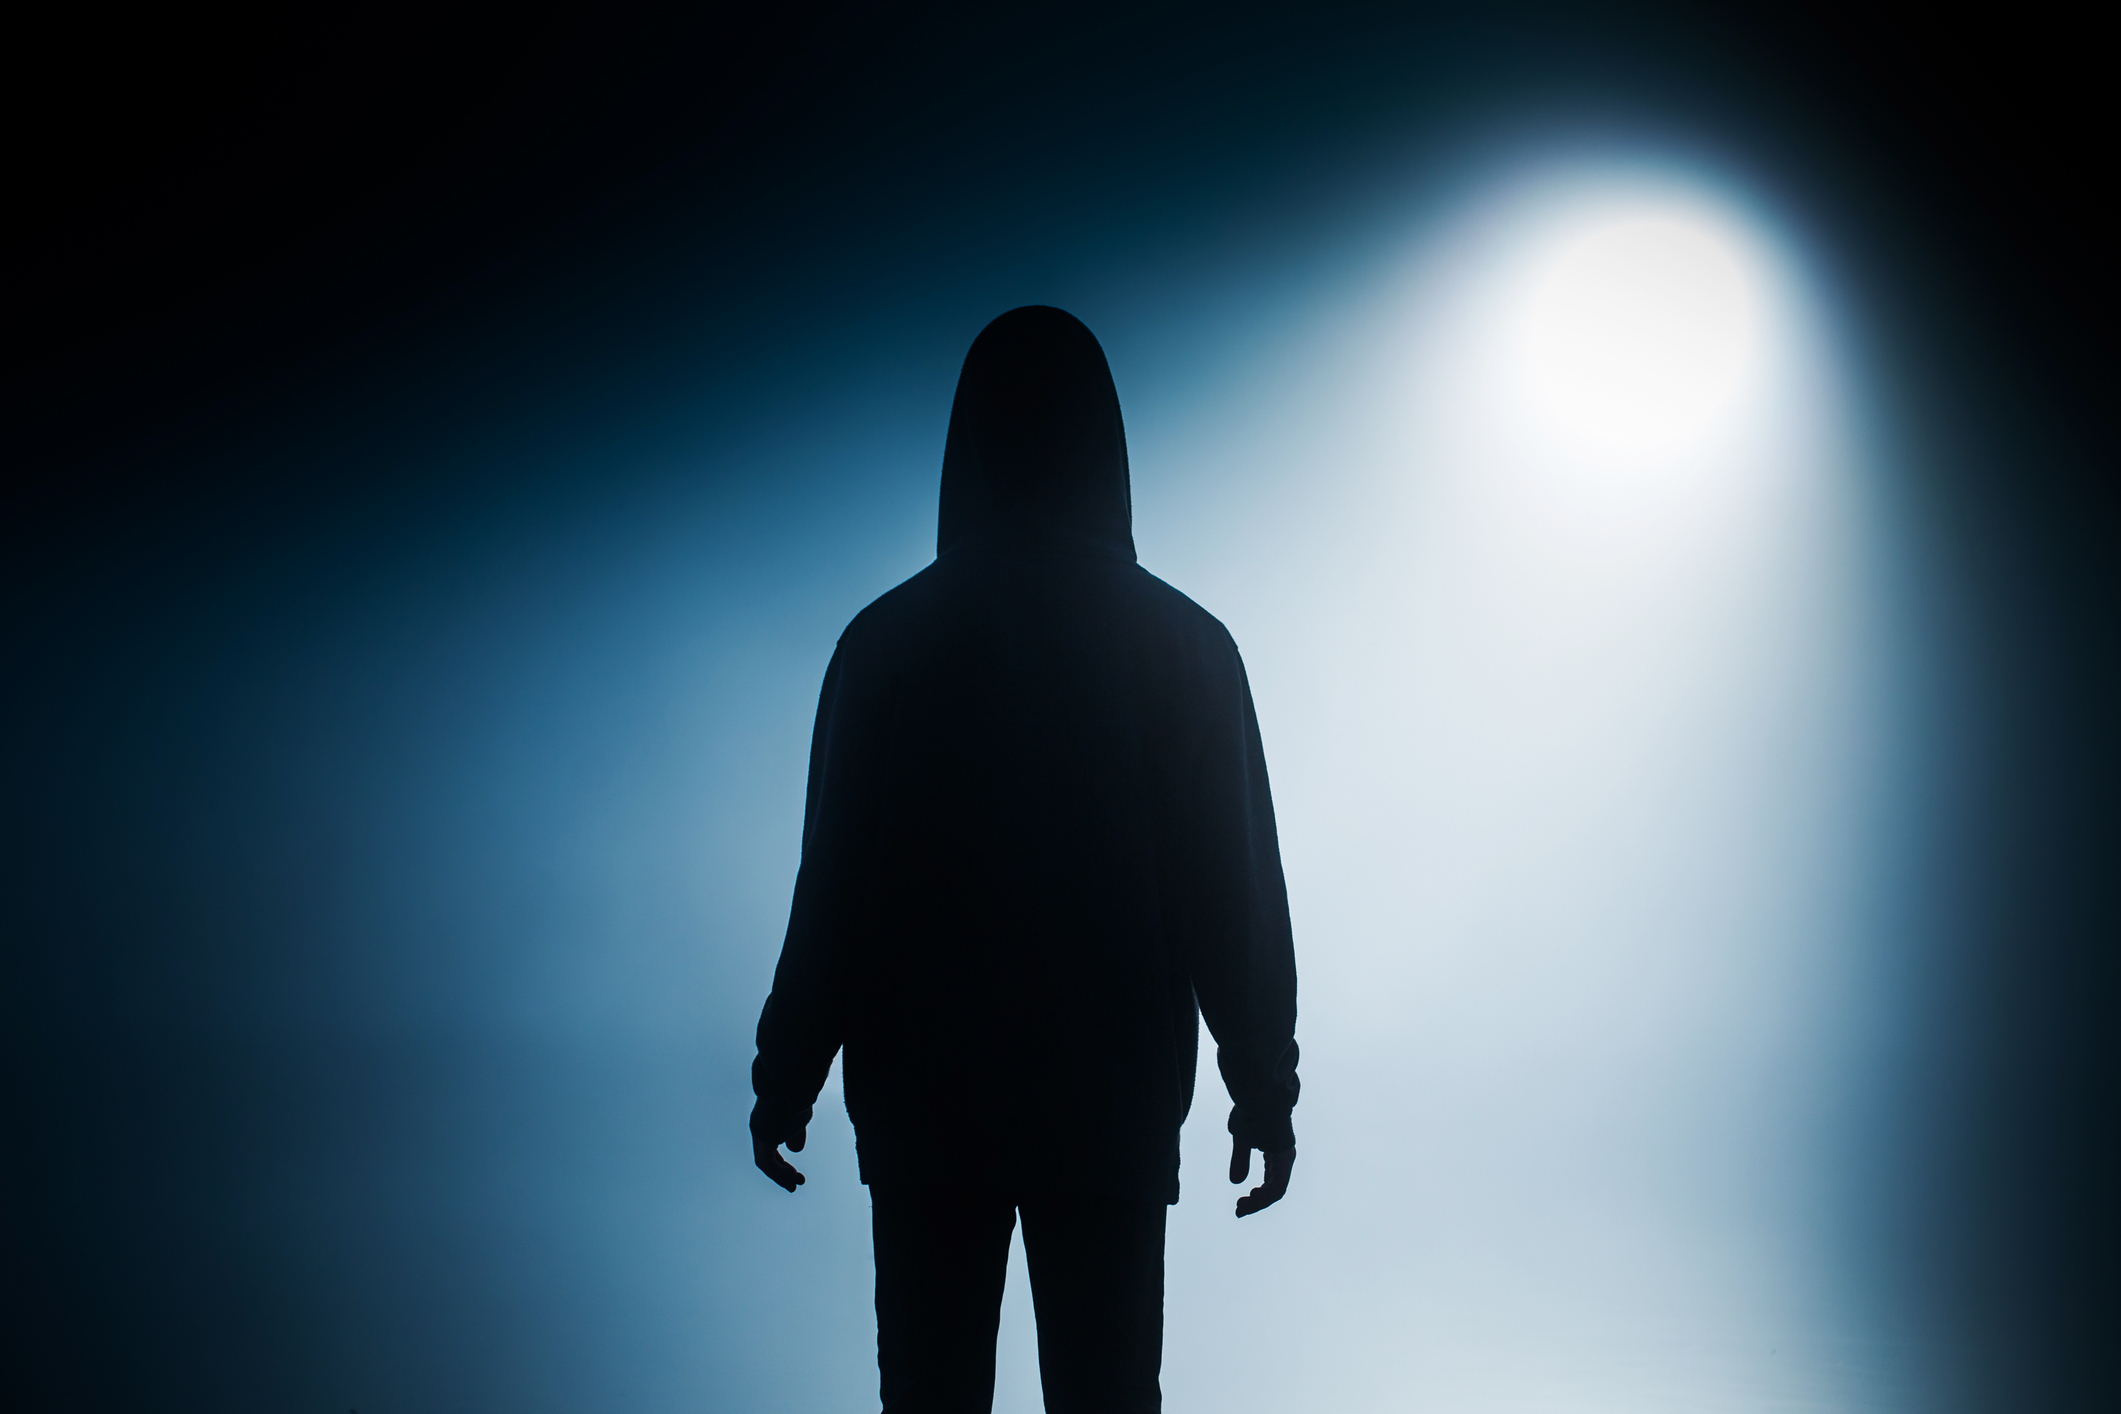 Silhouetted figure standing against a bright light in a dark room, creating a mysterious atmosphere